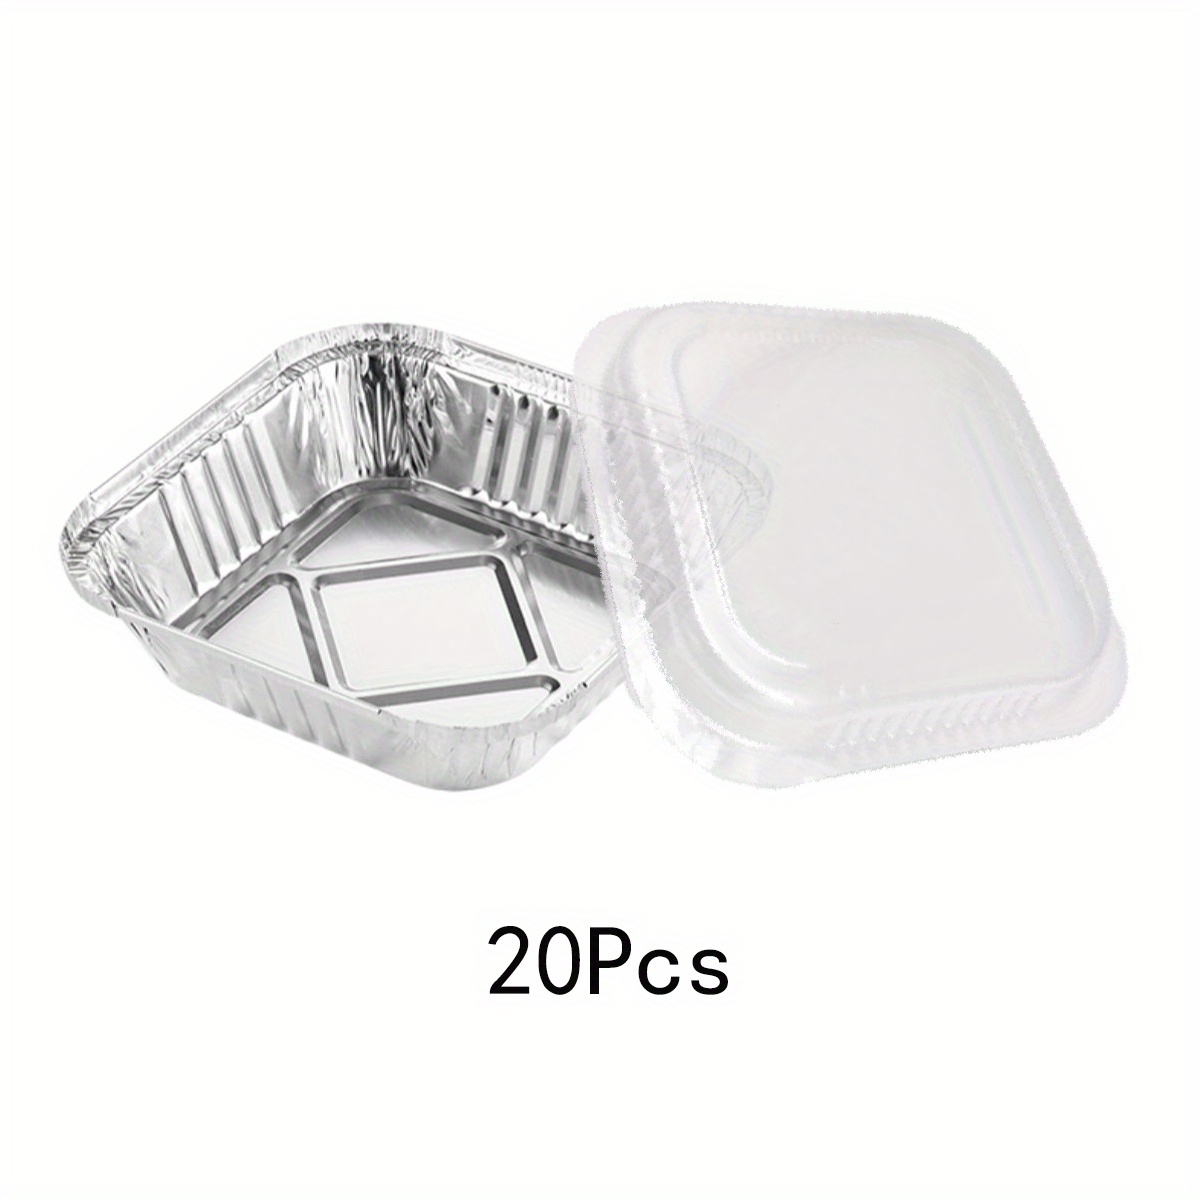 8x8 Foil Pans with Lids (20 Count) 8 Inch Square Aluminum Pans with Covers  - Foil Pans and Foil Lids - Disposable Food Containers Great for Baking